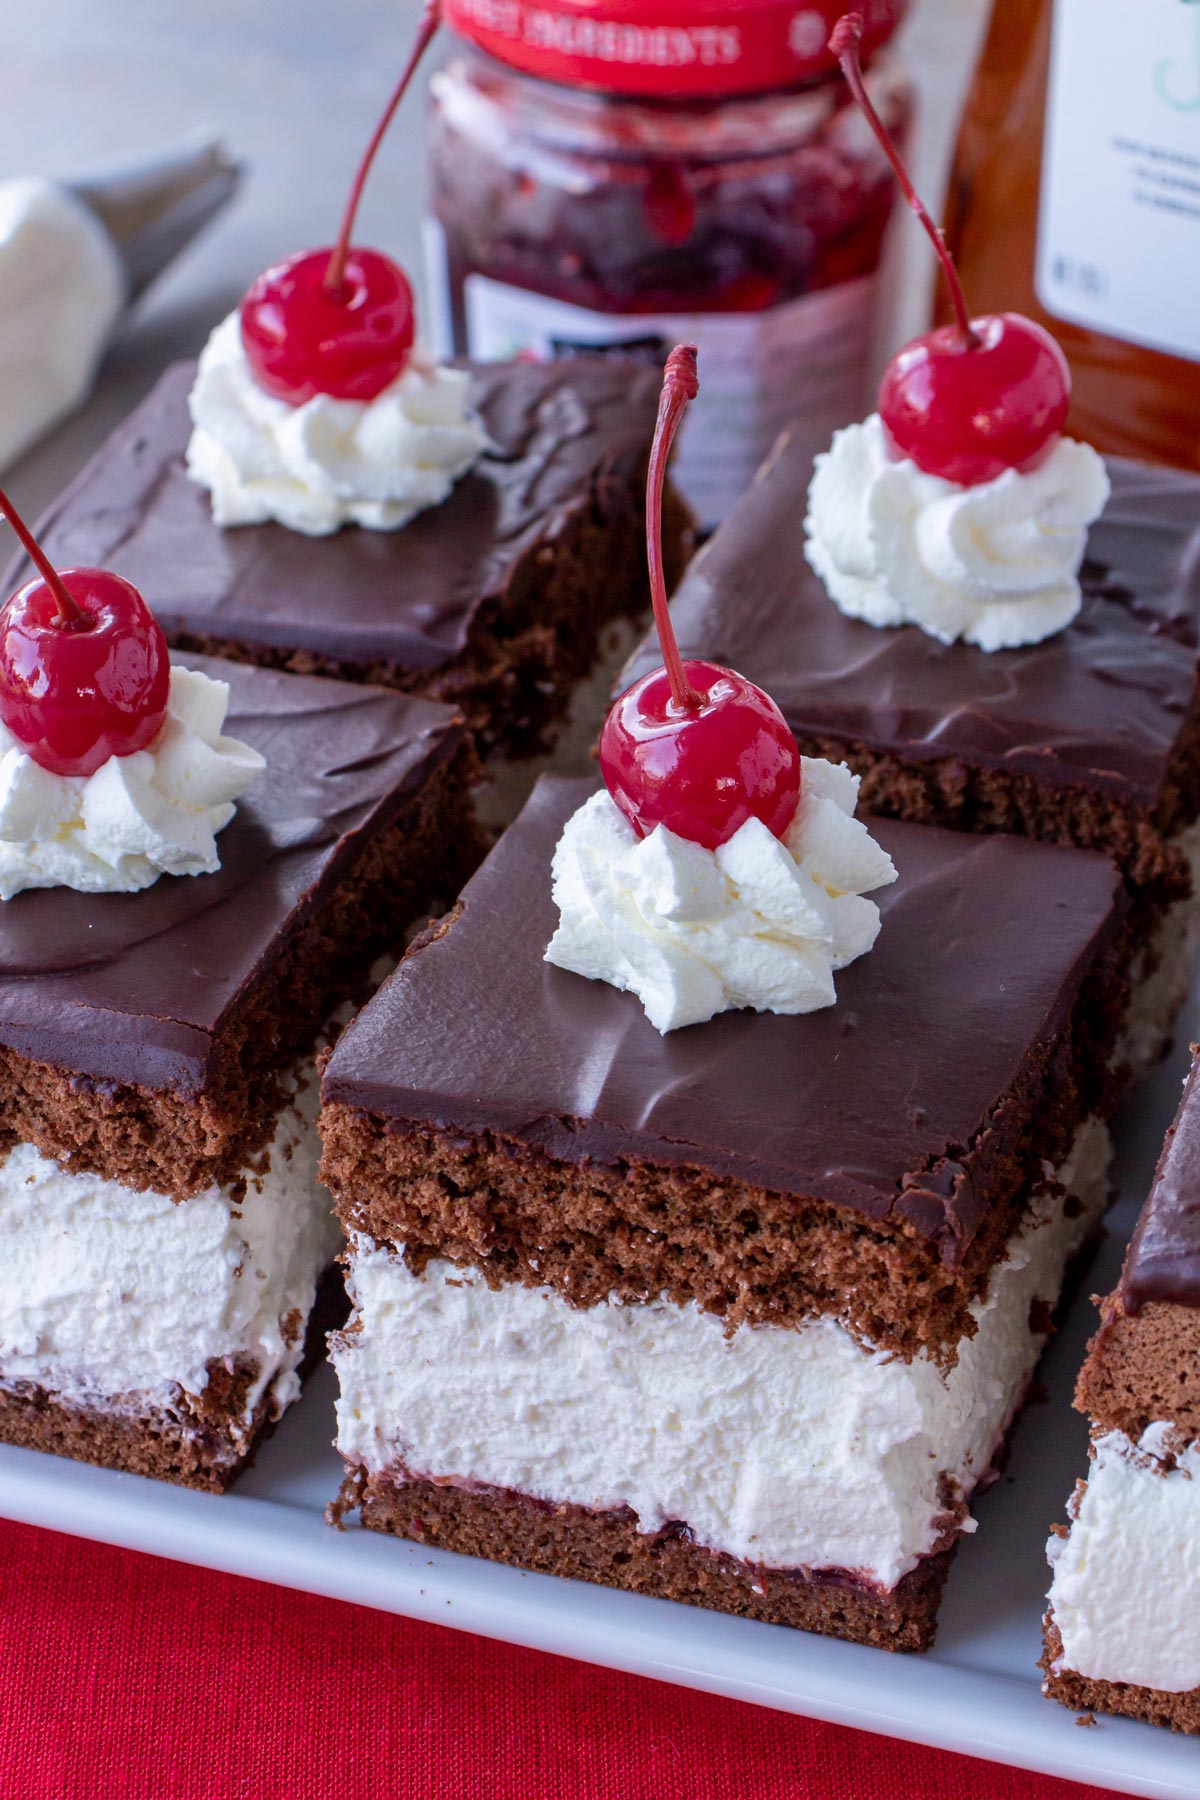 Square pieces of chocolate cake filled with thick whipped cream and topped with cherries.